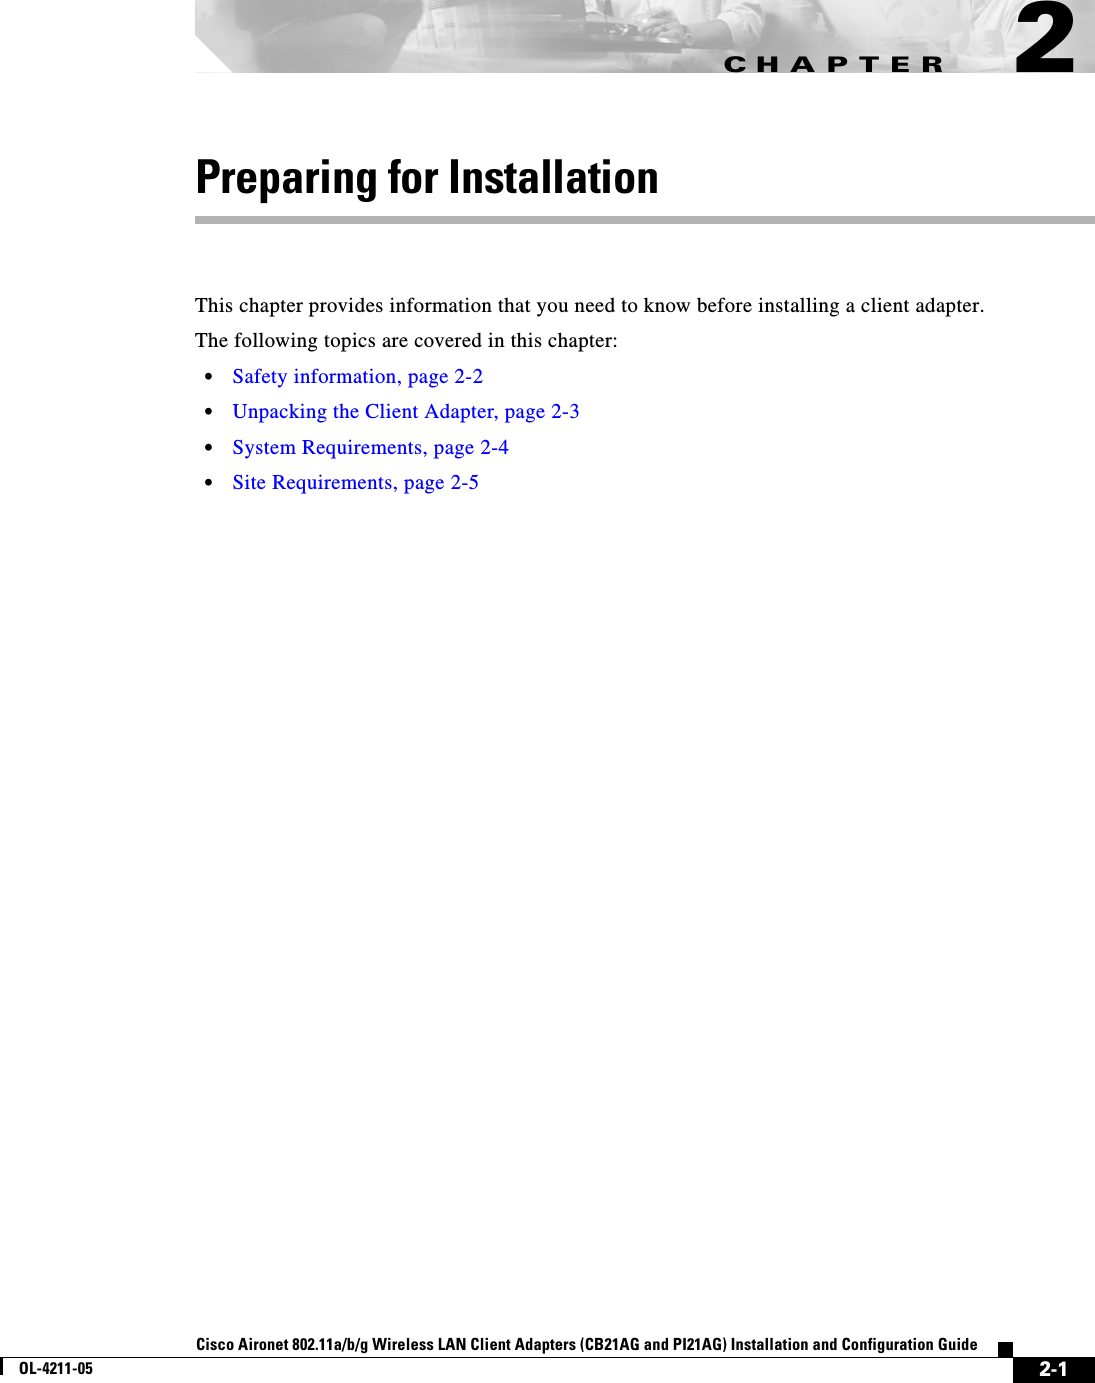 CHAPTER2-1Cisco Aironet 802.11a/b/g Wireless LAN Client Adapters (CB21AG and PI21AG) Installation and Configuration GuideOL-4211-052Preparing for InstallationThis chapter provides information that you need to know before installing a client adapter.The following topics are covered in this chapter:•Safety information, page 2-2•Unpacking the Client Adapter, page 2-3•System Requirements, page 2-4•Site Requirements, page 2-5